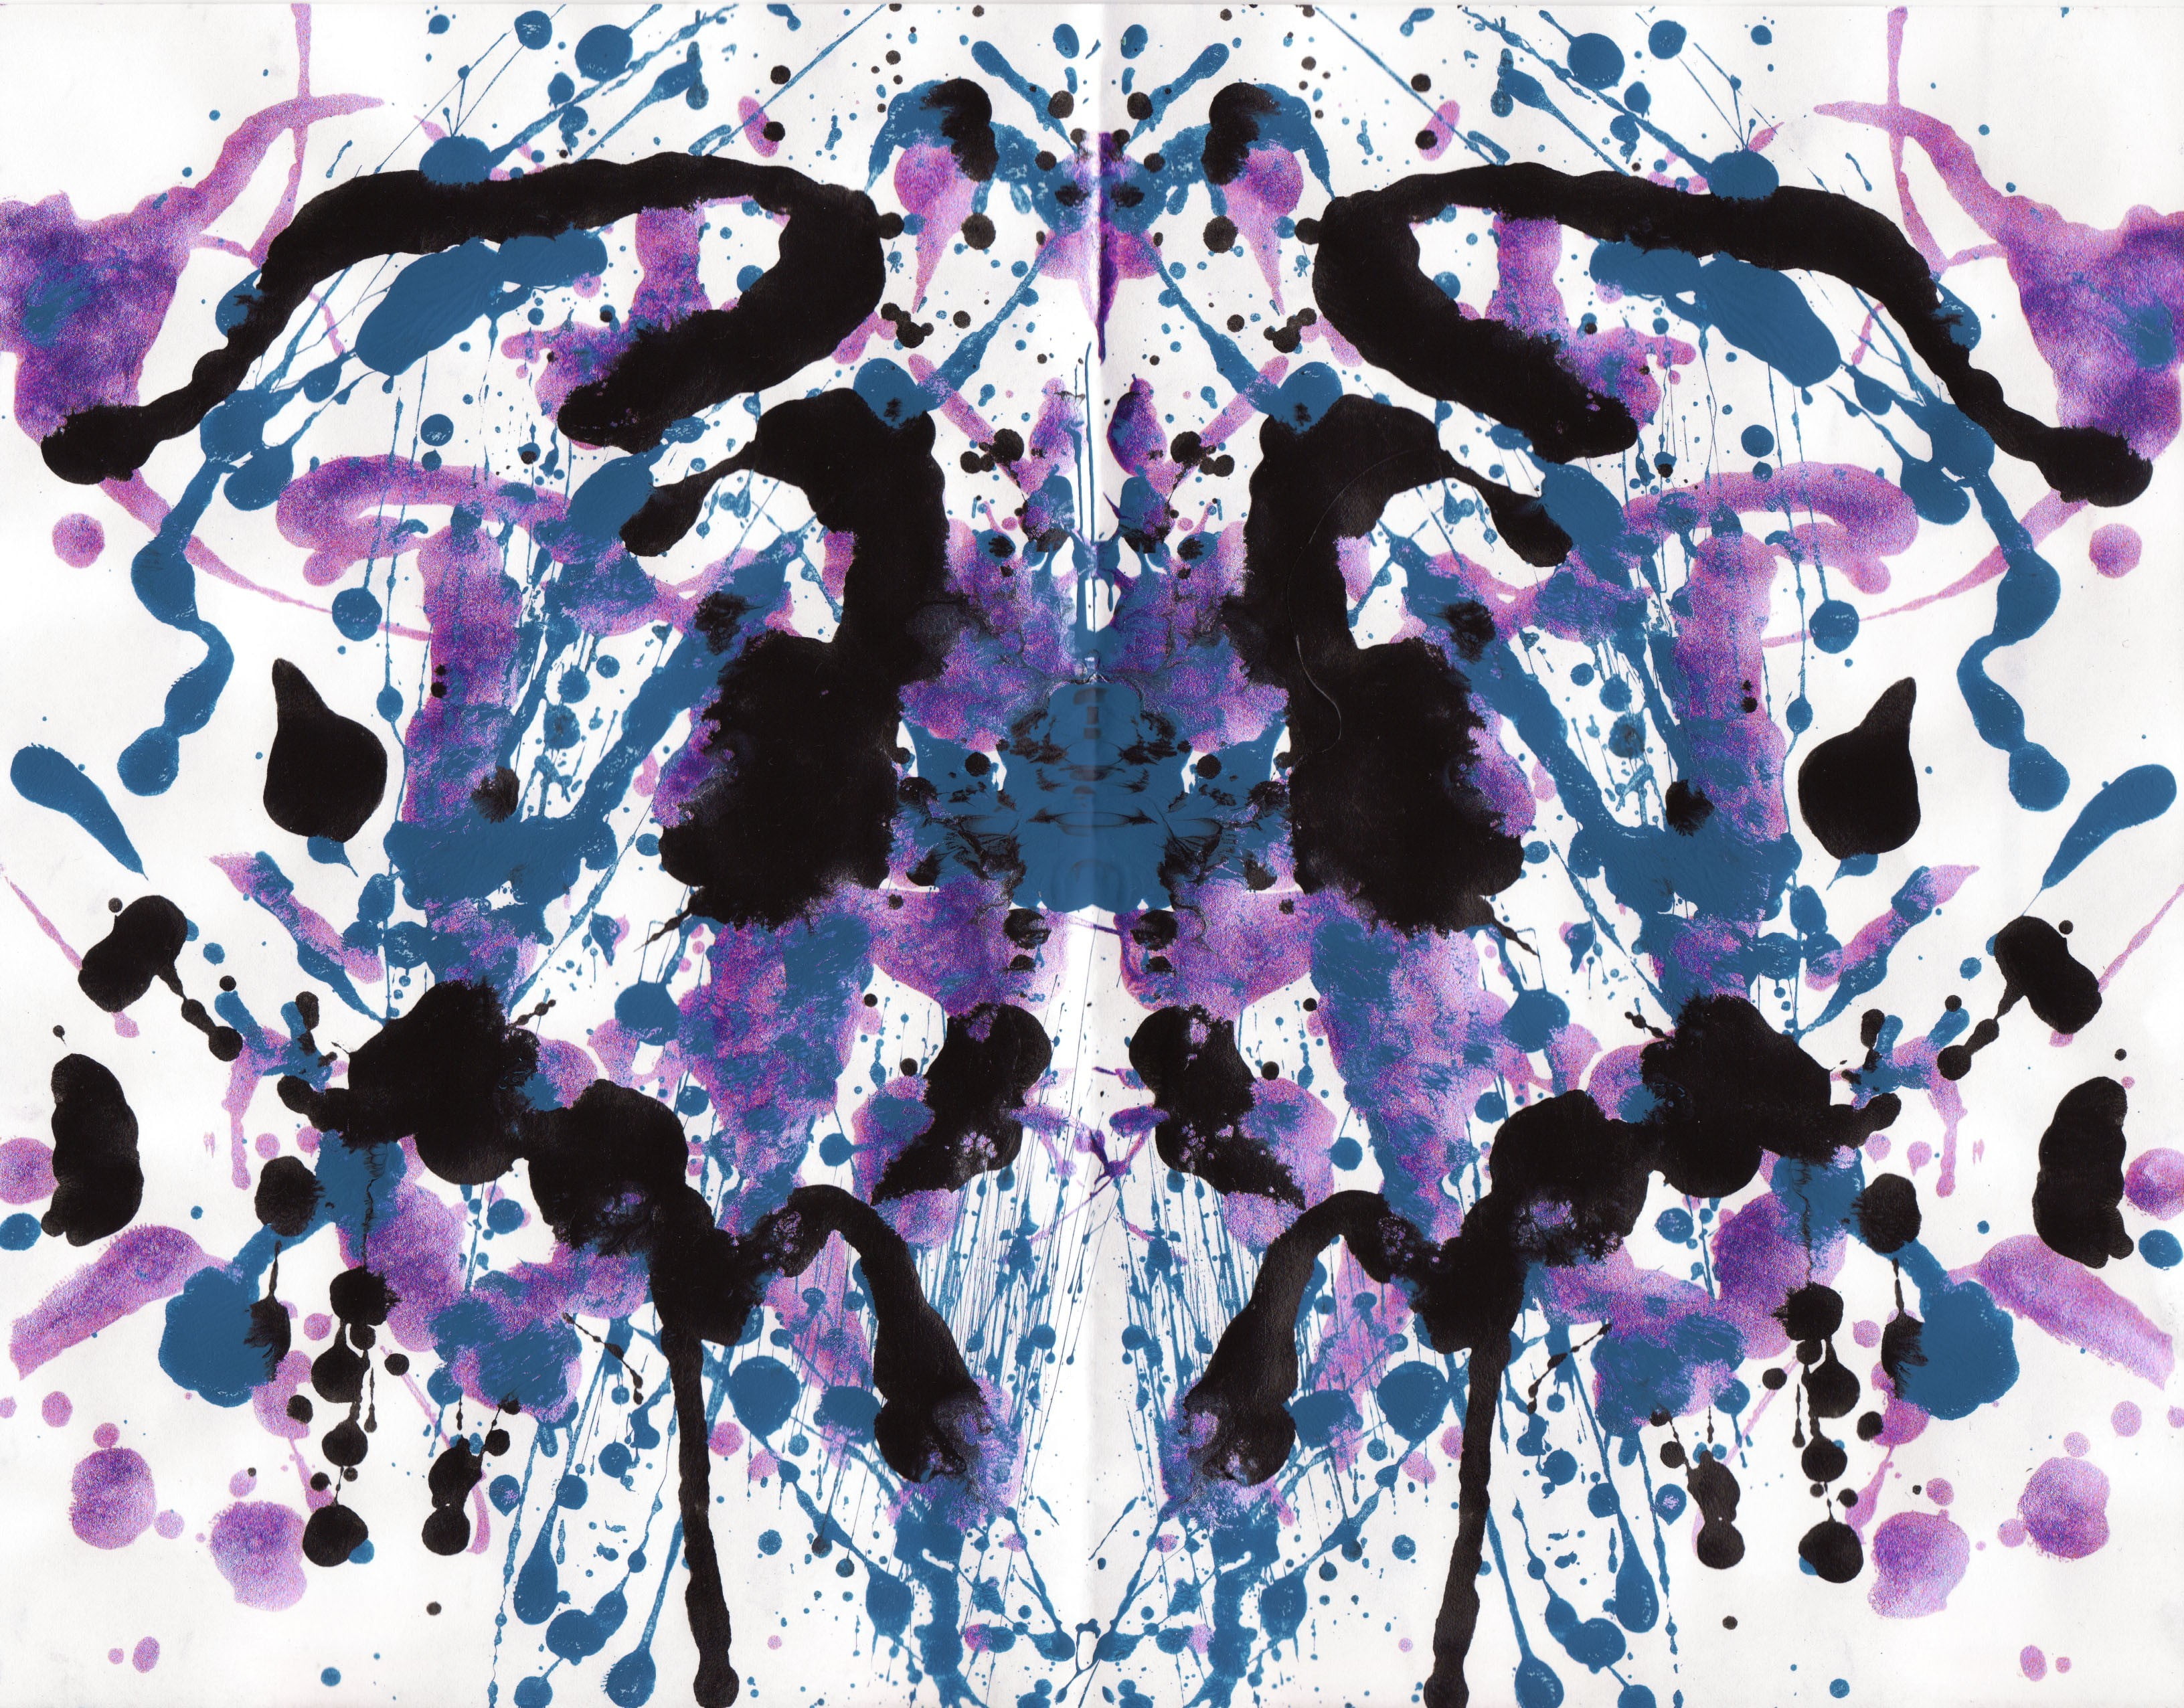 white and multicolored abstract painting, ink, symmetry, paint splatter, Rorschach test